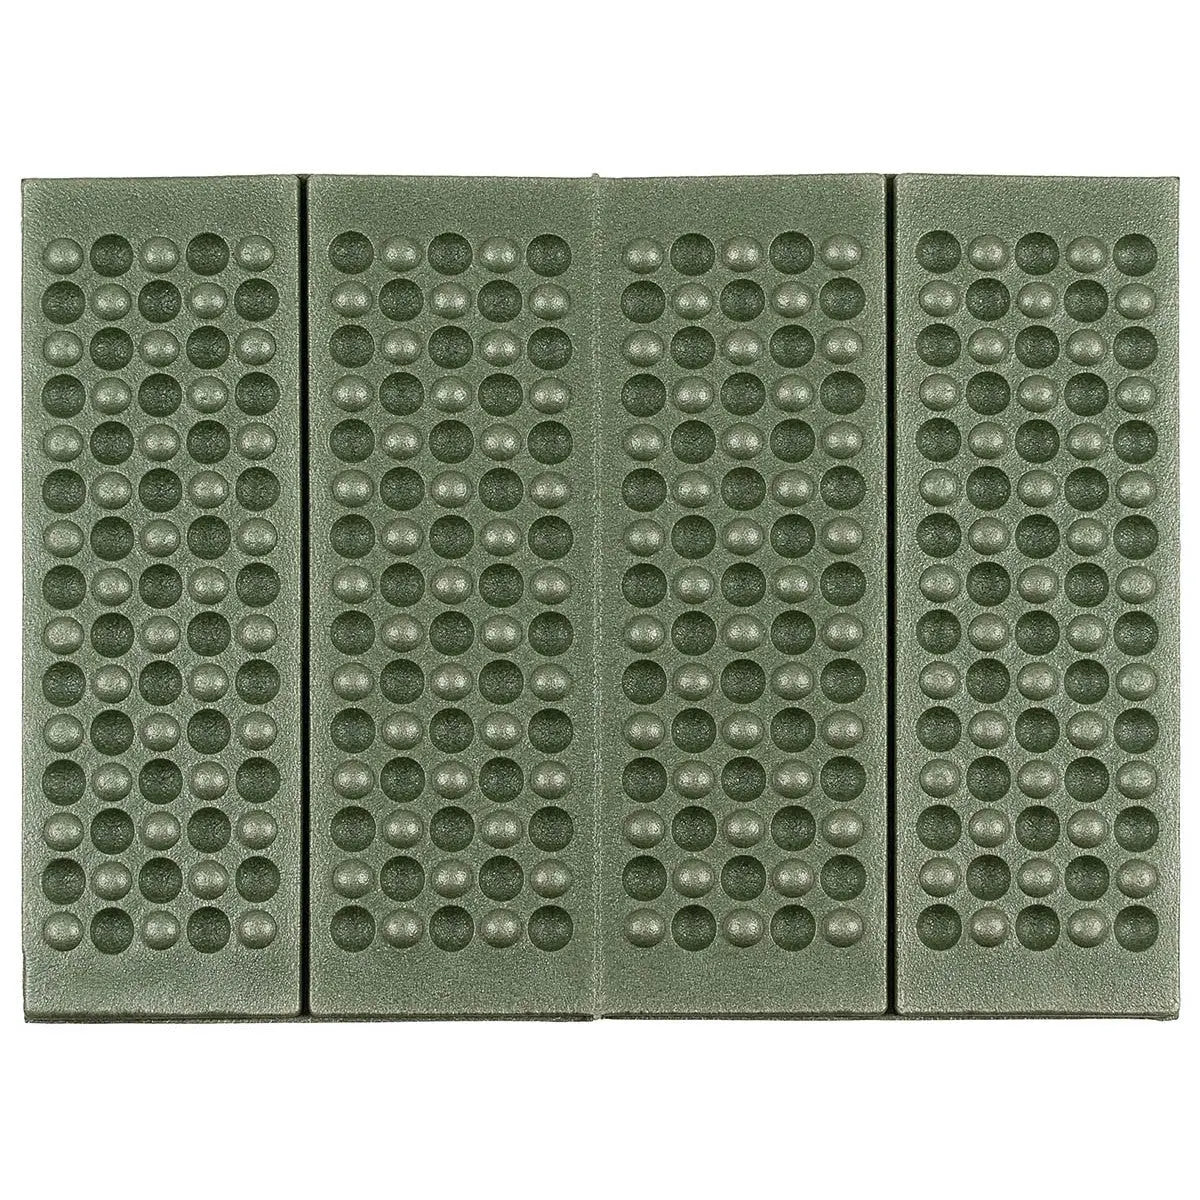 Thermal Seat Pad, foldable, OD green NSO Gear